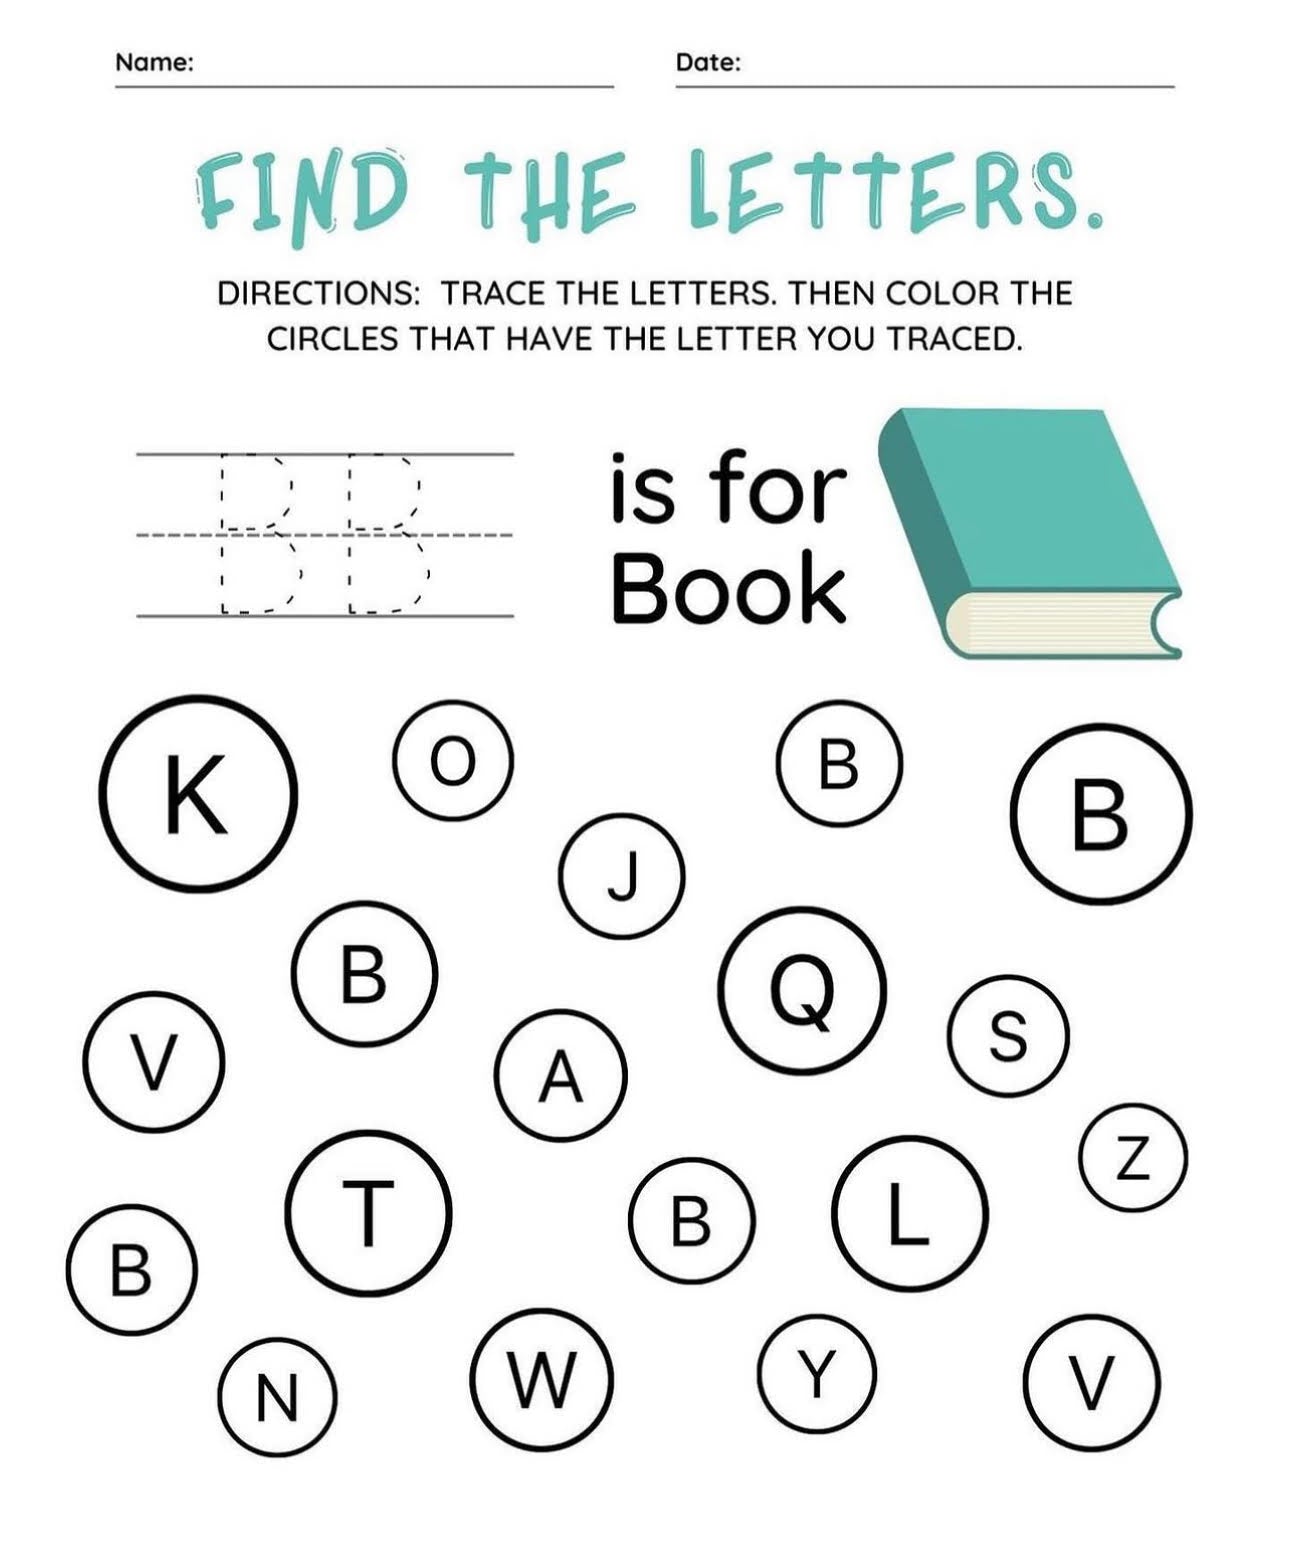 The Big Preschool Letter Book - Learn my Letters (PAPERBACK)